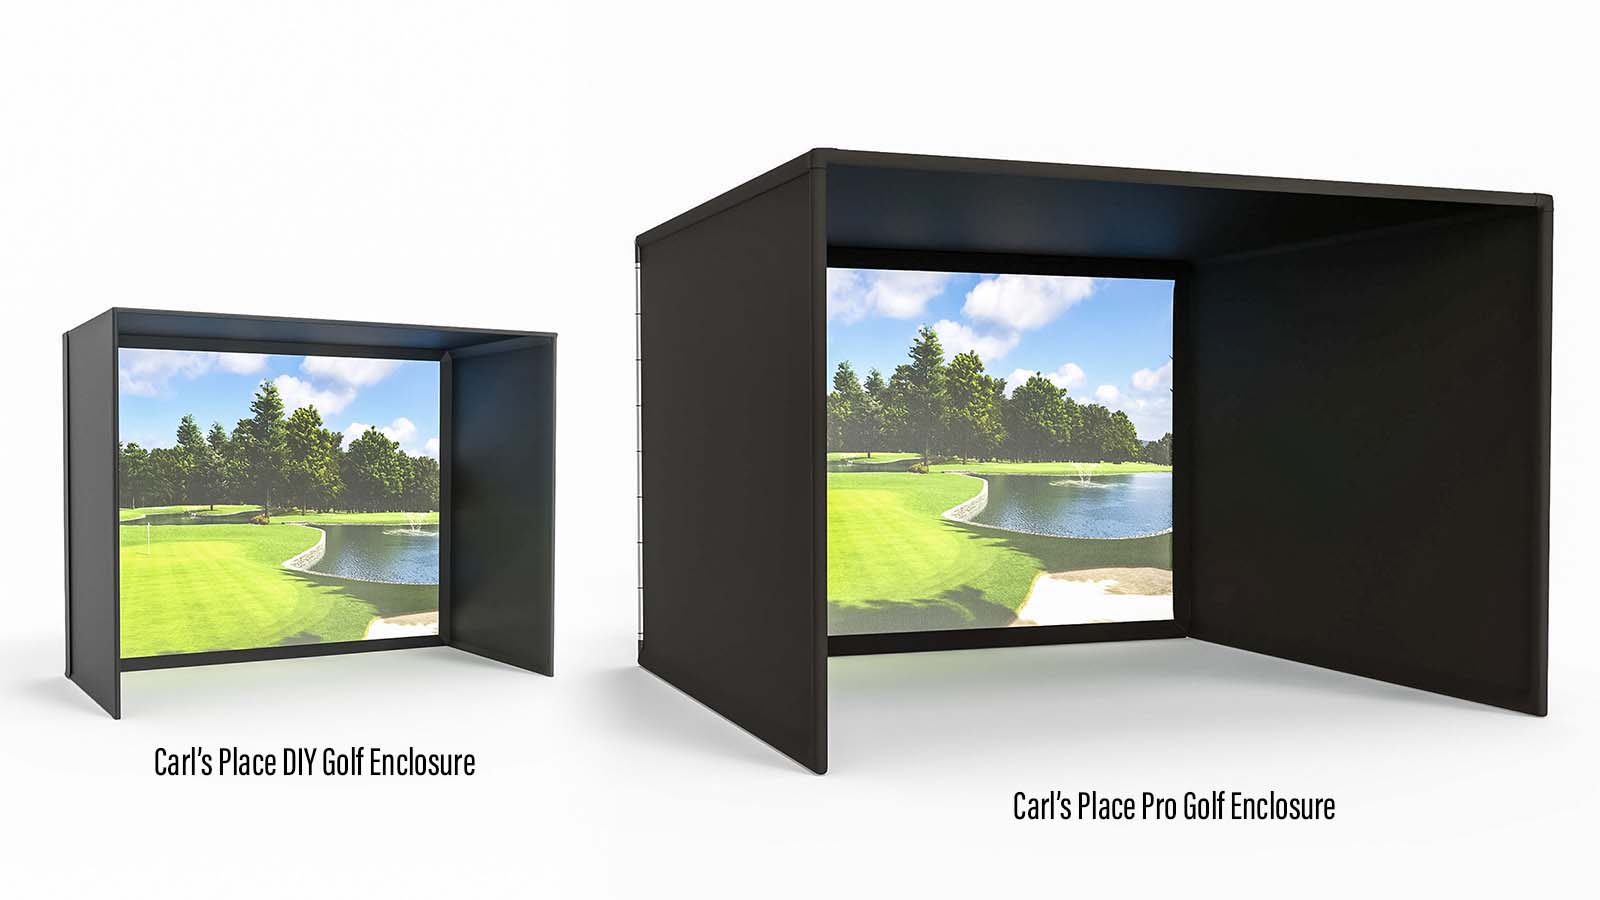 DIY vs. Pro: Which golf enclosure is best for your space?